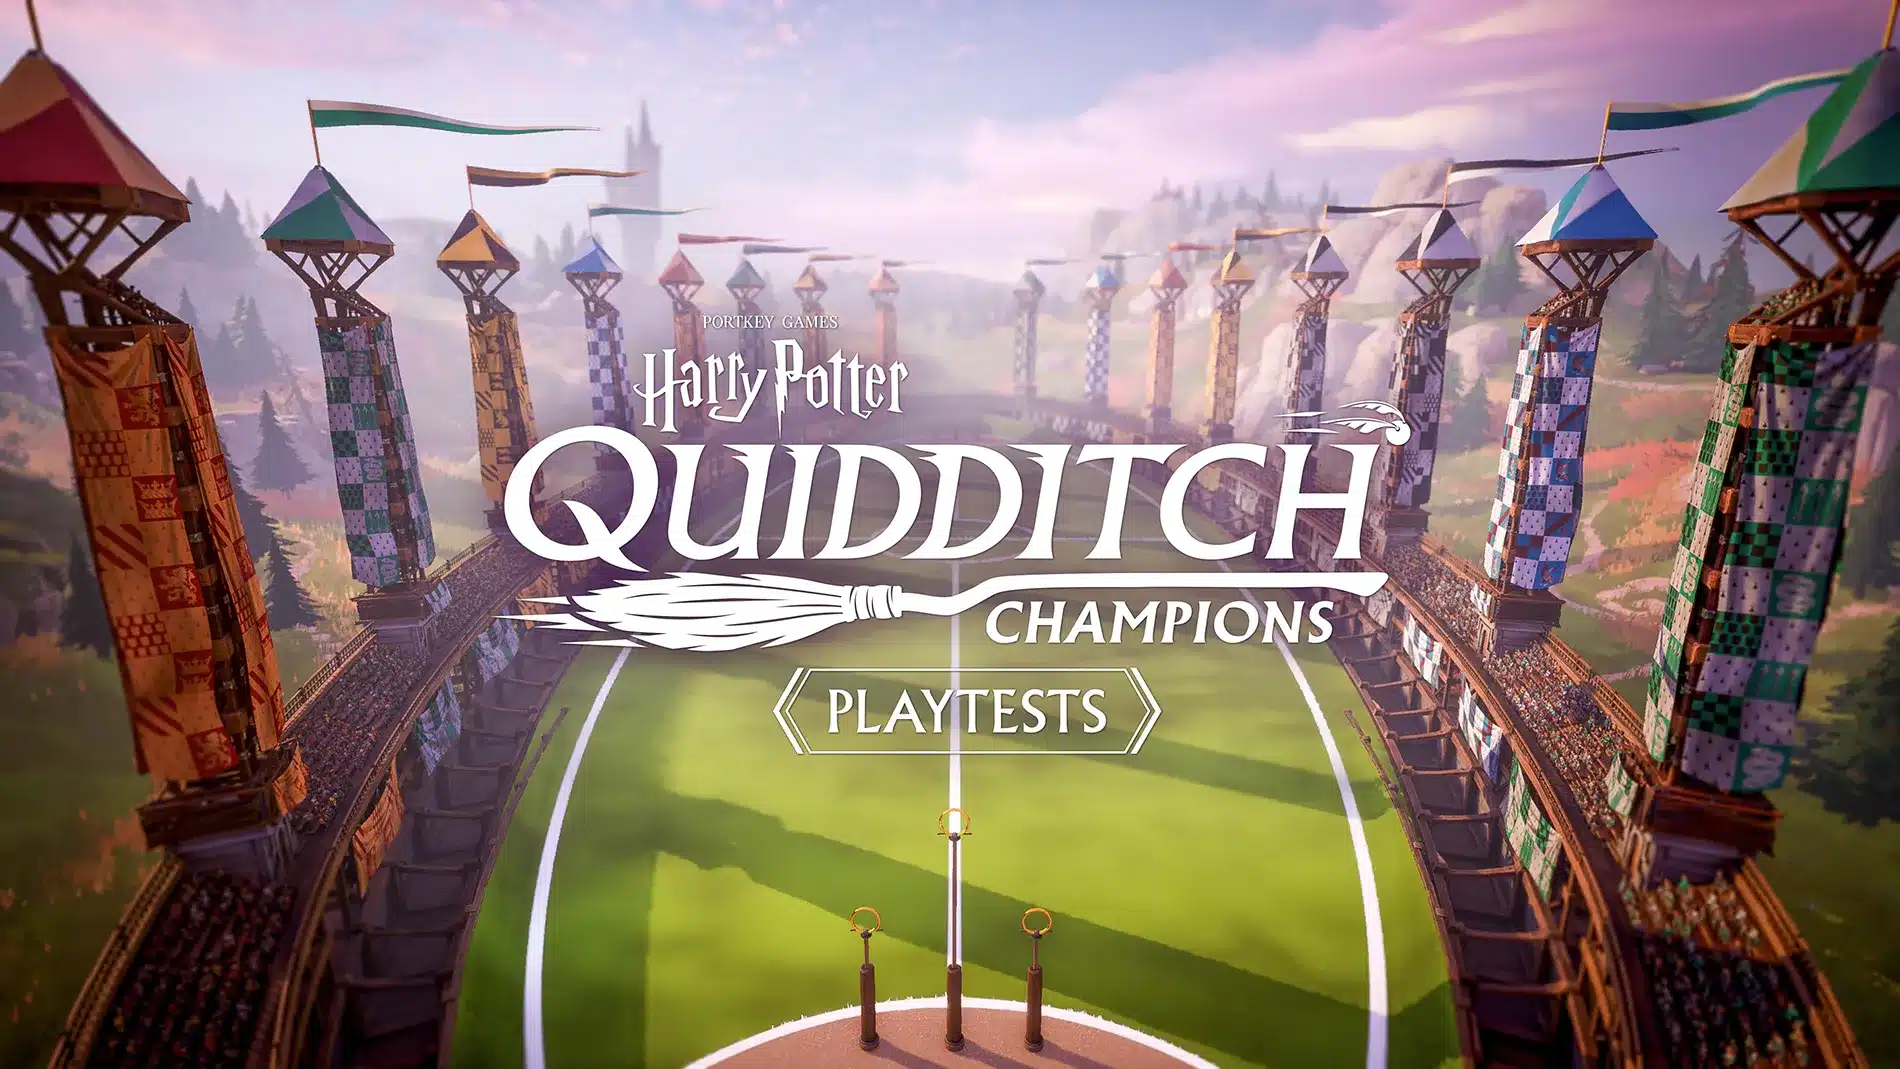 The gameplay of Quidditch is shown online